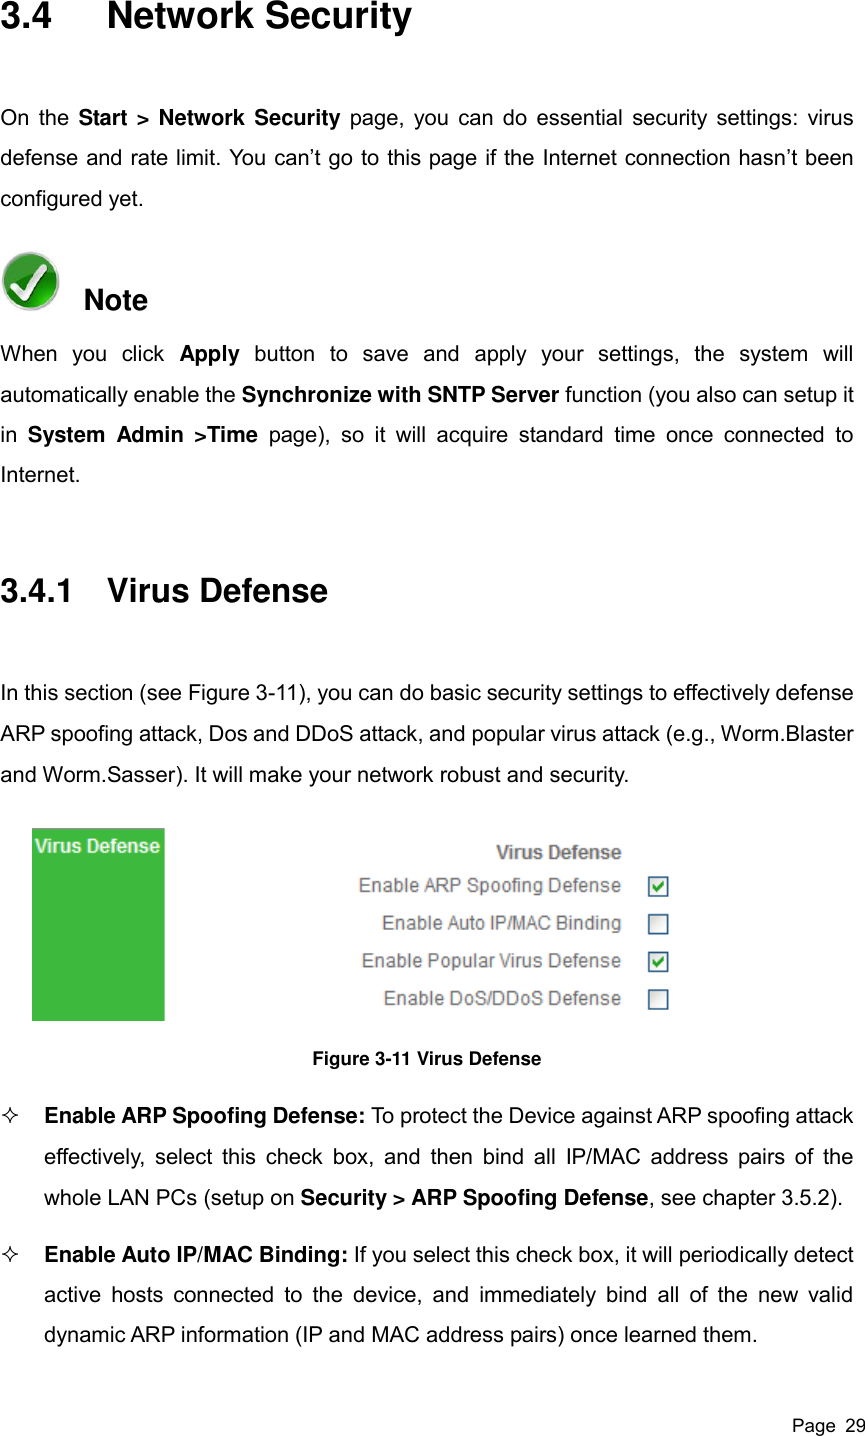  Page  29 3.4  Network Security On the Start &gt; Network Security page, you can do essential security settings: virus defense and rate limit. You can’t go to this page if the Internet connection hasn’t been configured yet.   Note When  you  click  Apply  button  to  save  and  apply  your  settings,  the  system  will automatically enable the Synchronize with SNTP Server function (you also can setup it in  System  Admin  &gt;Time  page),  so  it  will  acquire  standard  time  once  connected  to Internet.   3.4.1  Virus Defense In this section (see Figure 3-11), you can do basic security settings to effectively defense ARP spoofing attack, Dos and DDoS attack, and popular virus attack (e.g., Worm.Blaster and Worm.Sasser). It will make your network robust and security.  Figure 3-11 Virus Defense  Enable ARP Spoofing Defense: To protect the Device against ARP spoofing attack effectively,  select this check box,  and  then bind all  IP/MAC address pairs of  the whole LAN PCs (setup on Security &gt; ARP Spoofing Defense, see chapter 3.5.2).    Enable Auto IP/MAC Binding: If you select this check box, it will periodically detect active hosts  connected  to  the  device,  and  immediately  bind  all  of  the  new  valid dynamic ARP information (IP and MAC address pairs) once learned them. 